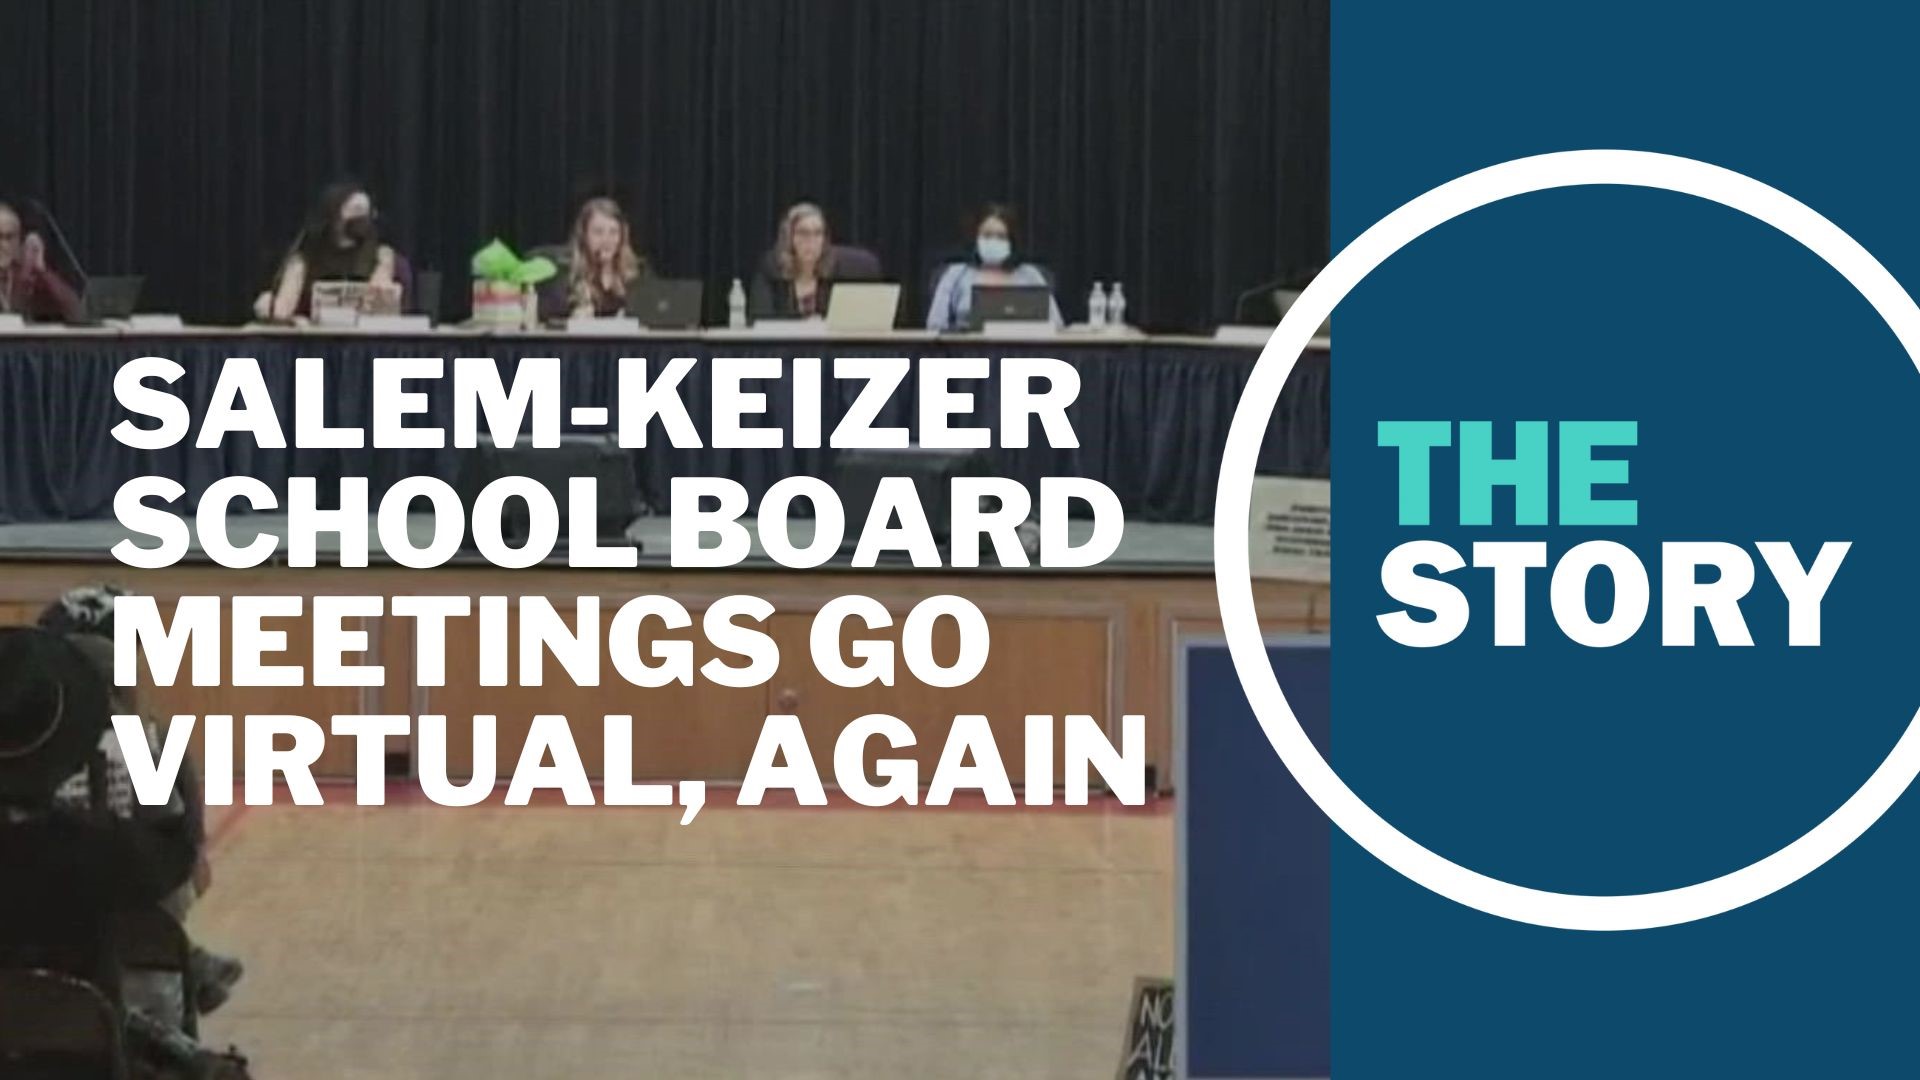 The superintendent of Salem-Keizer School District said meetings will stay online until the involved groups can find a way to be civil.